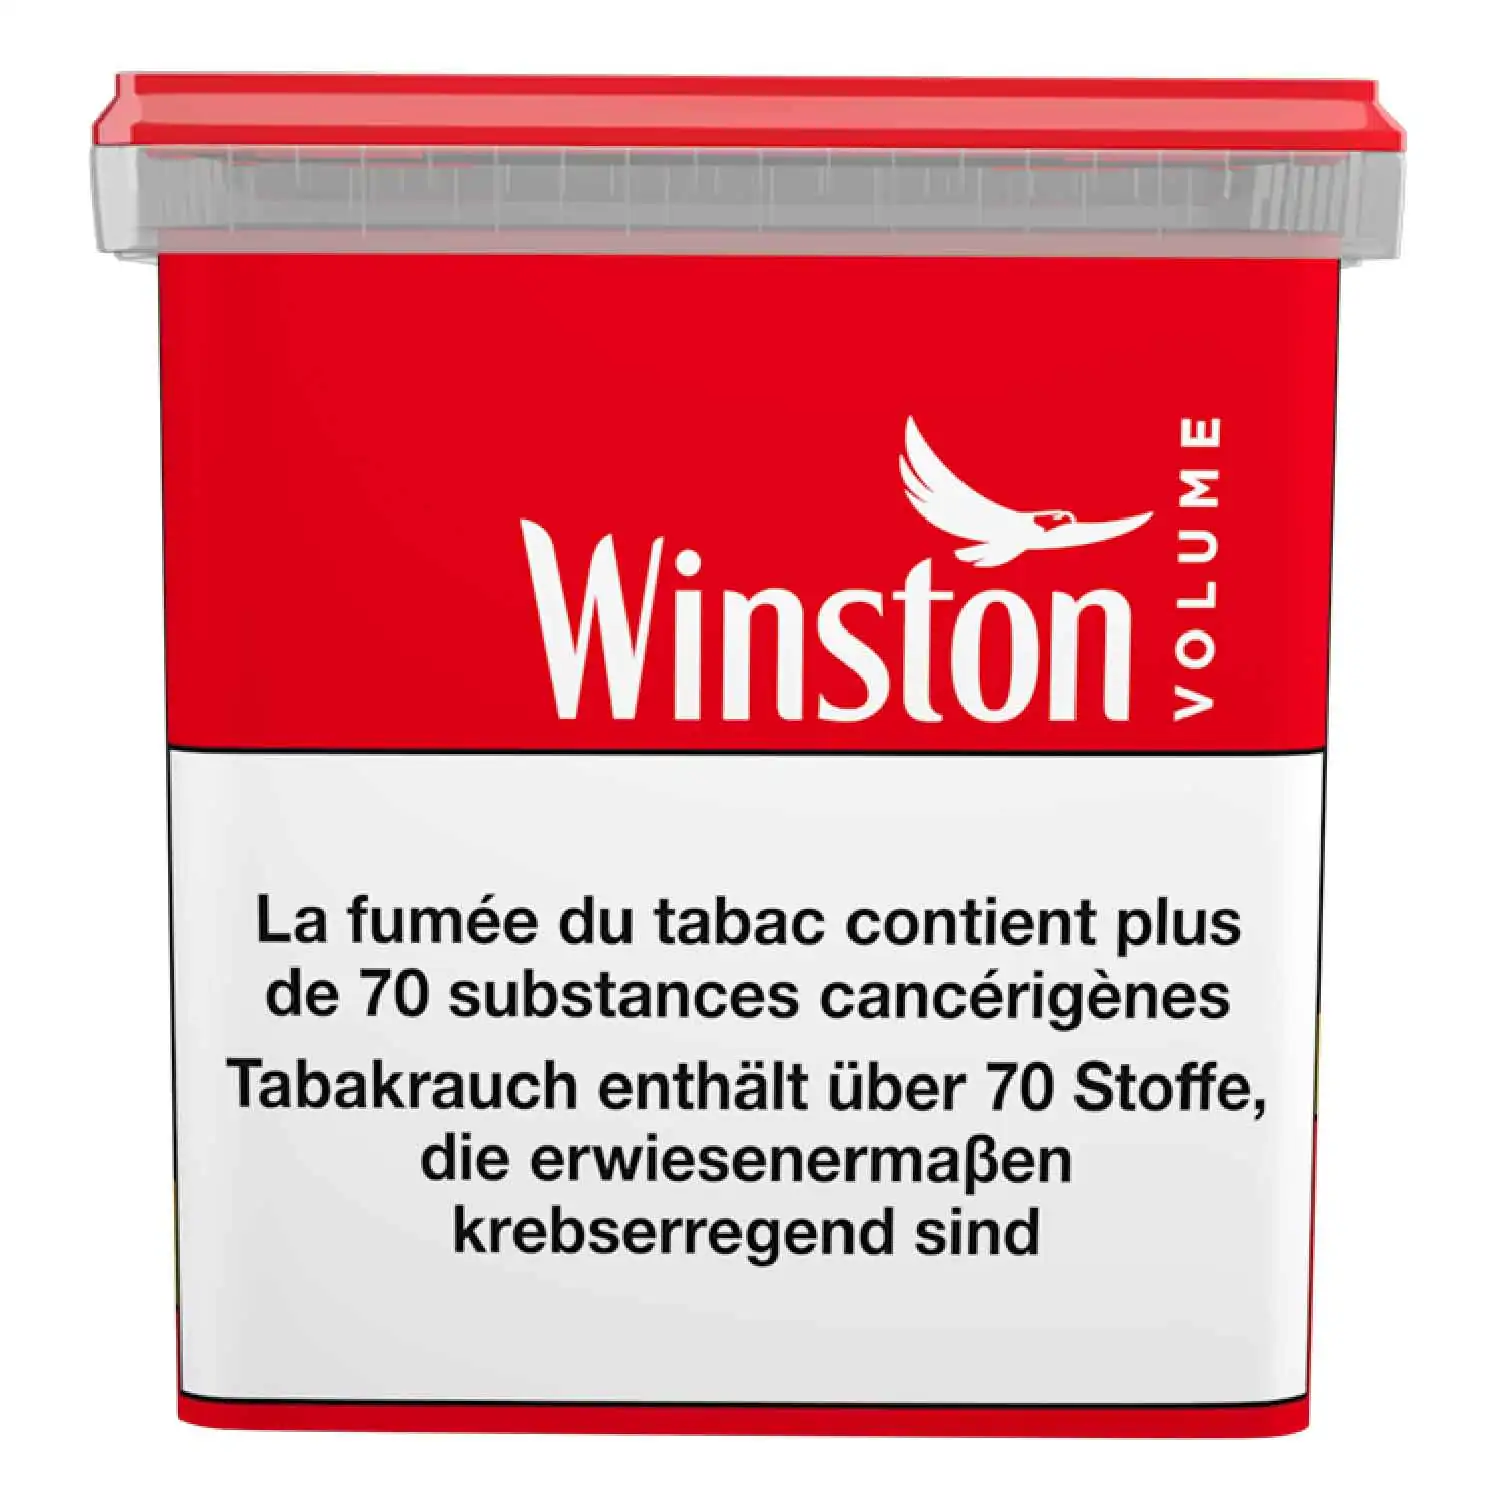 Winston volume rouge 400g - Buy at Real Tobacco